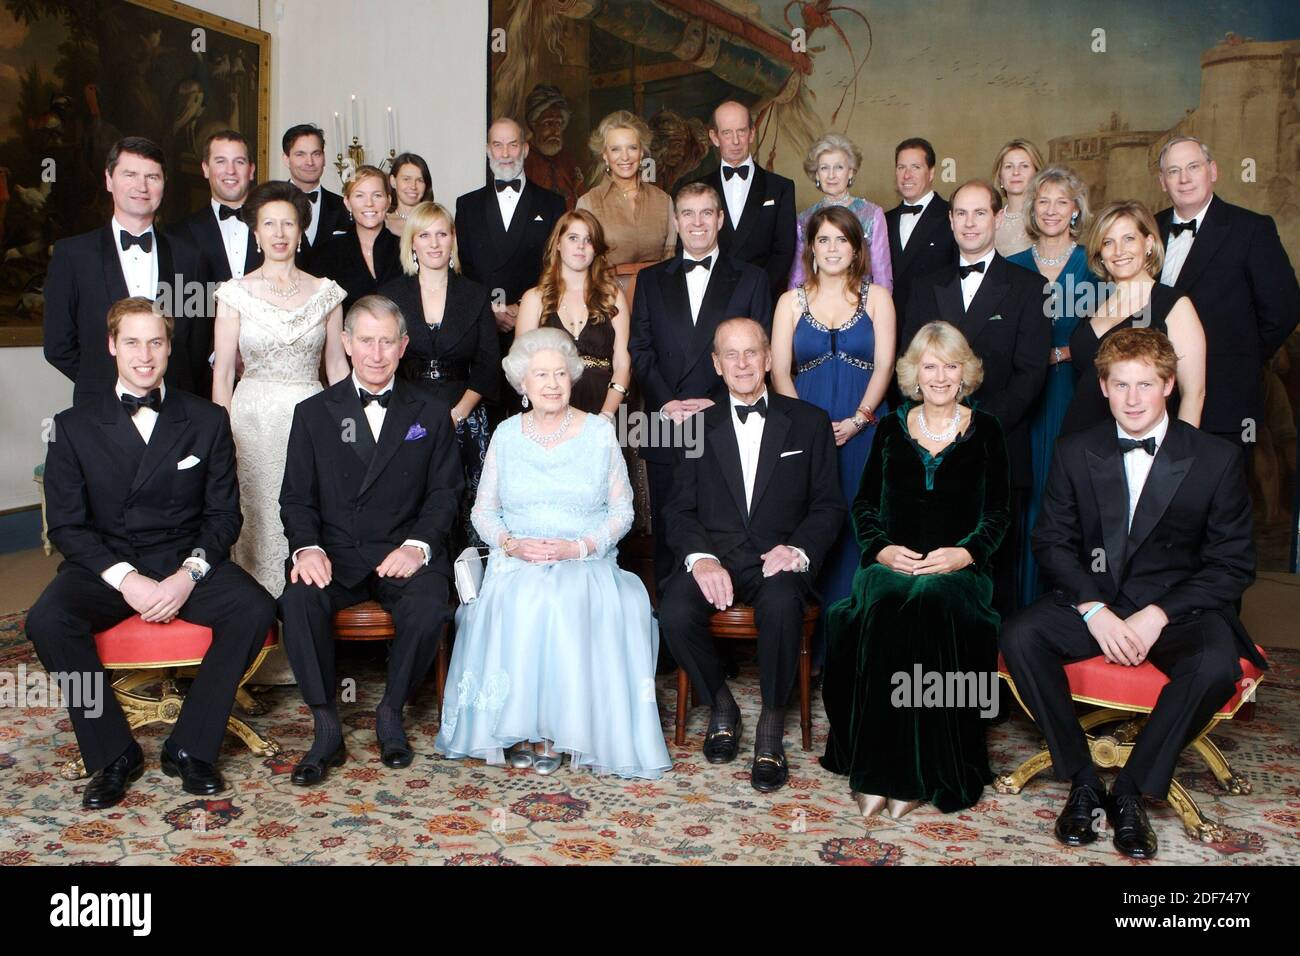 HM The Queen and HRH The Duke of Edinburgh at photo session by Tim Graham at Clarence House to celebrate Diamond Wedding Anniversary - Royal Family Stock Photo